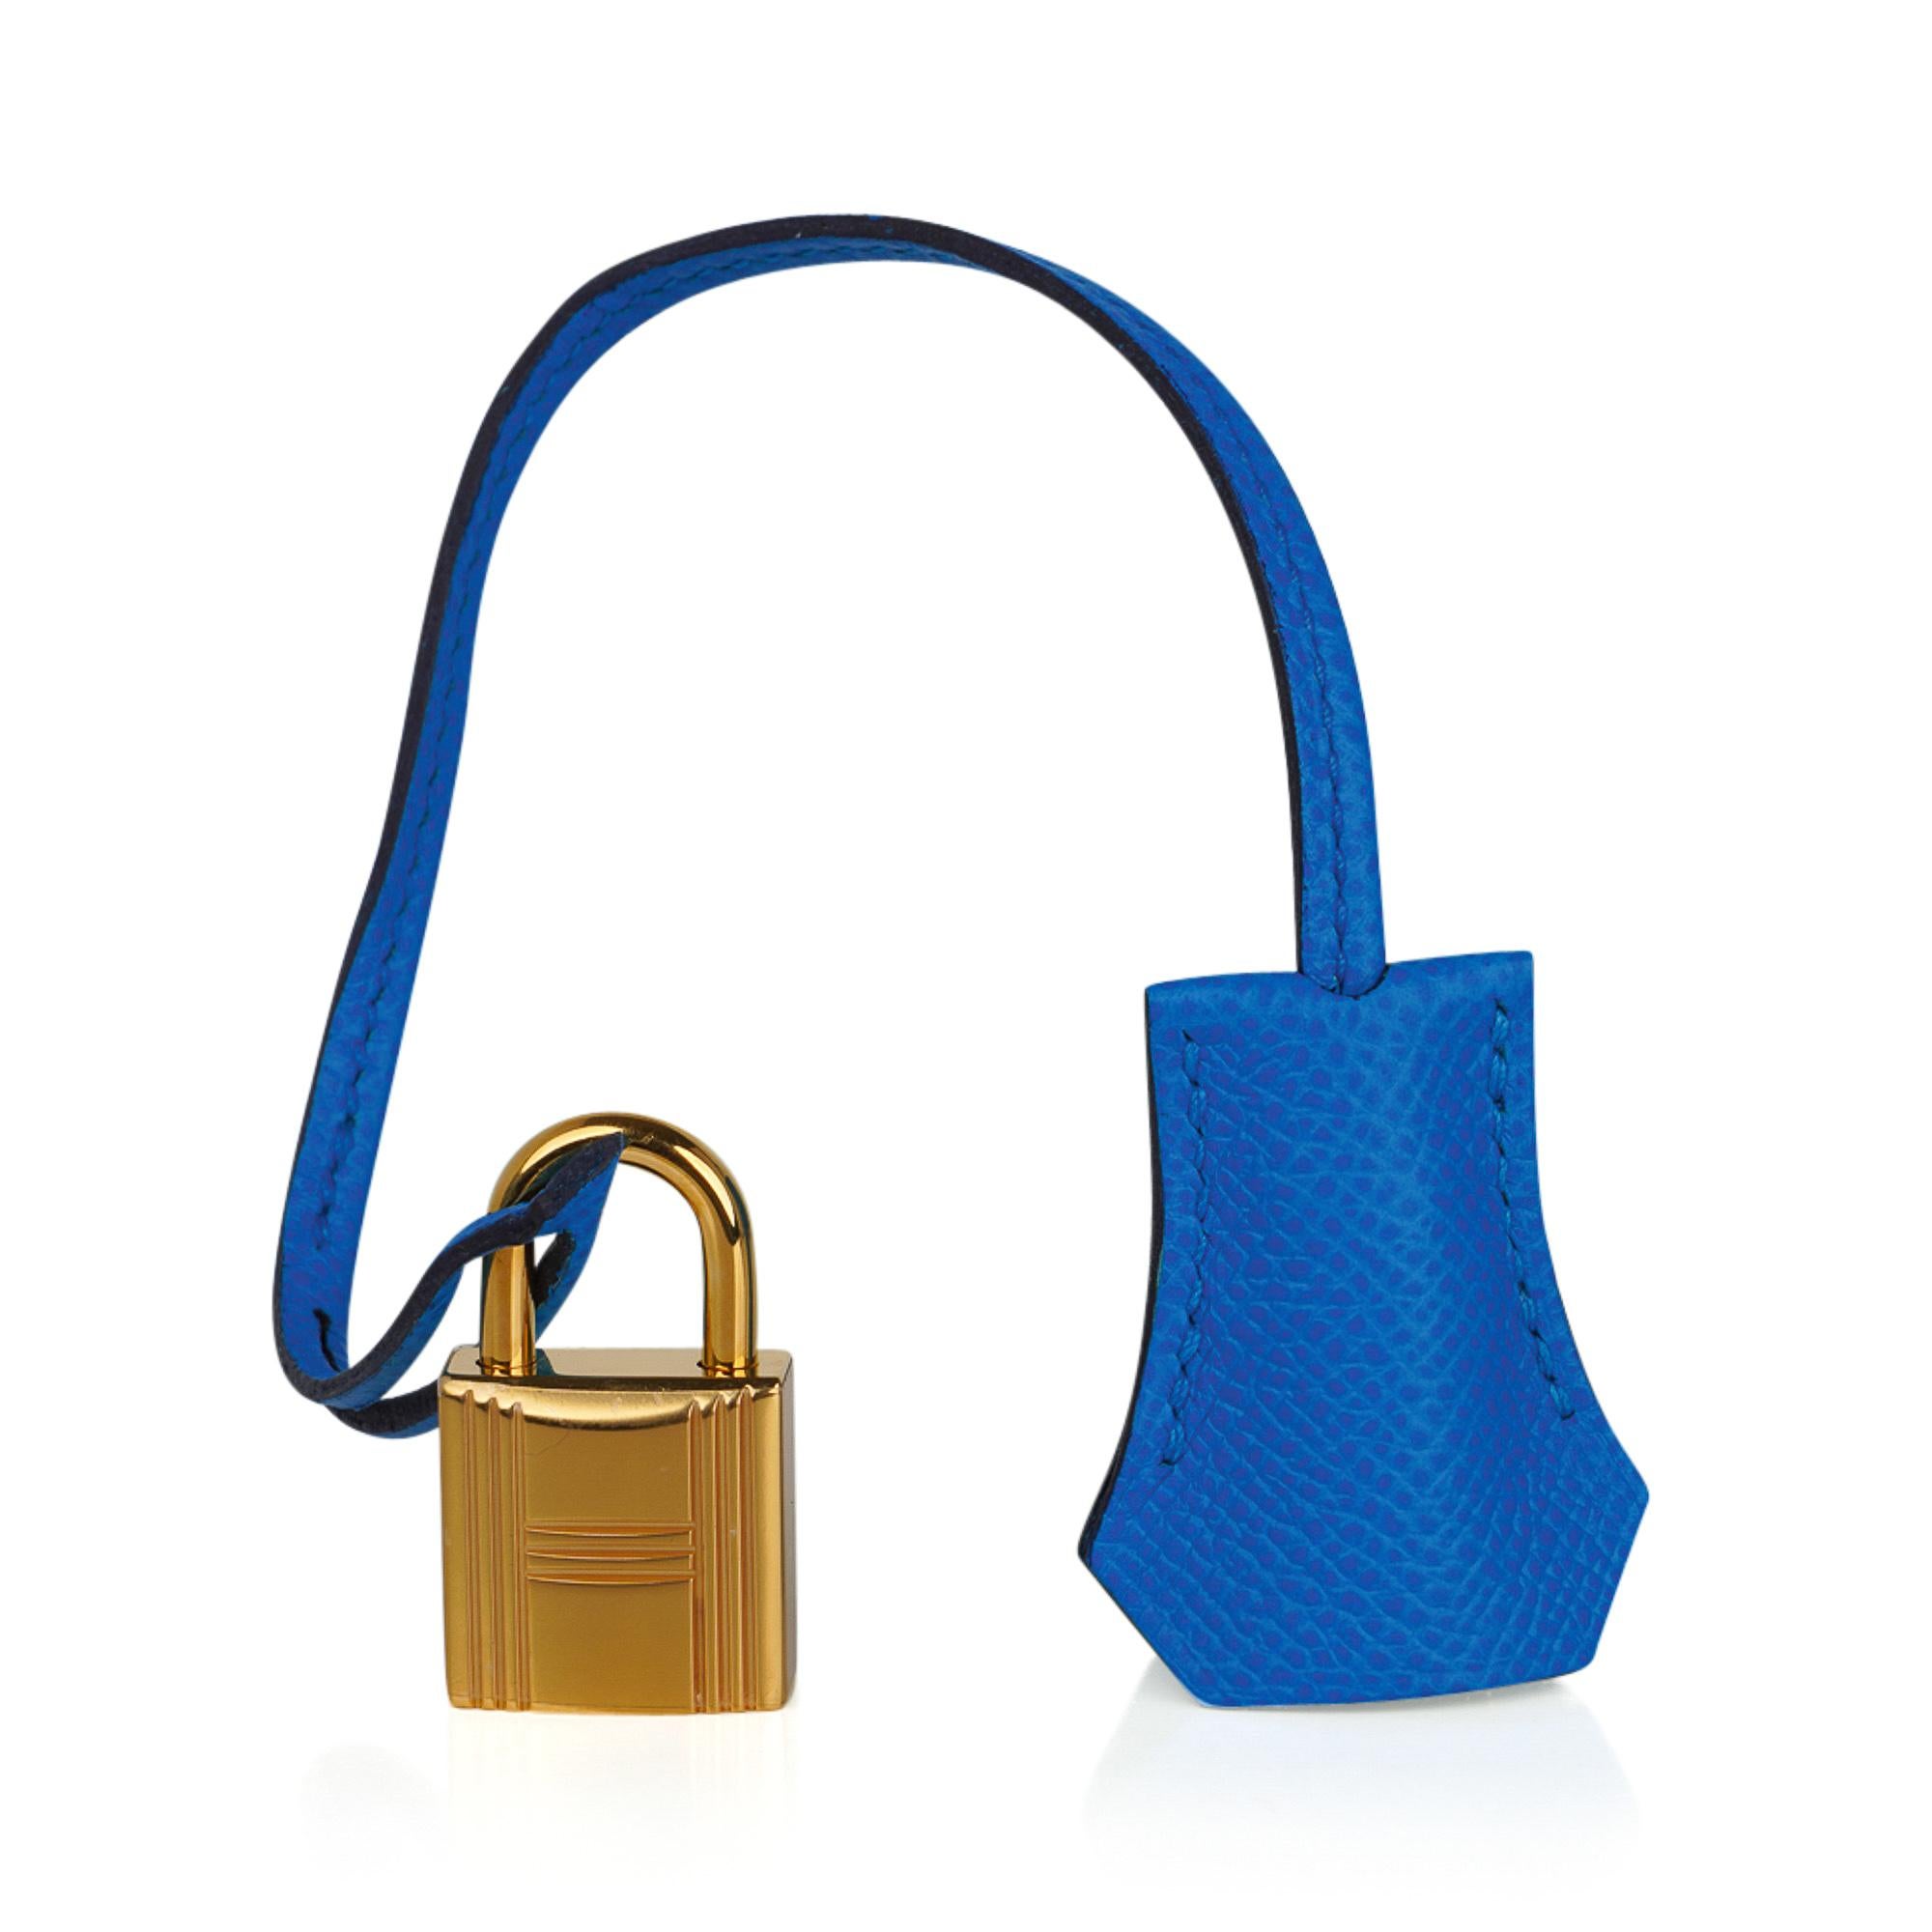 Mightychic offers a guaranteed authentic Hermes Birkin 30 bag featured in  vivid Blue Frida.
This stunning richly saturated Hermes Birkin bag is exquisite in Epsom leather.
Accentuated with lush gold hardware.
Comes with the lock and keys in the